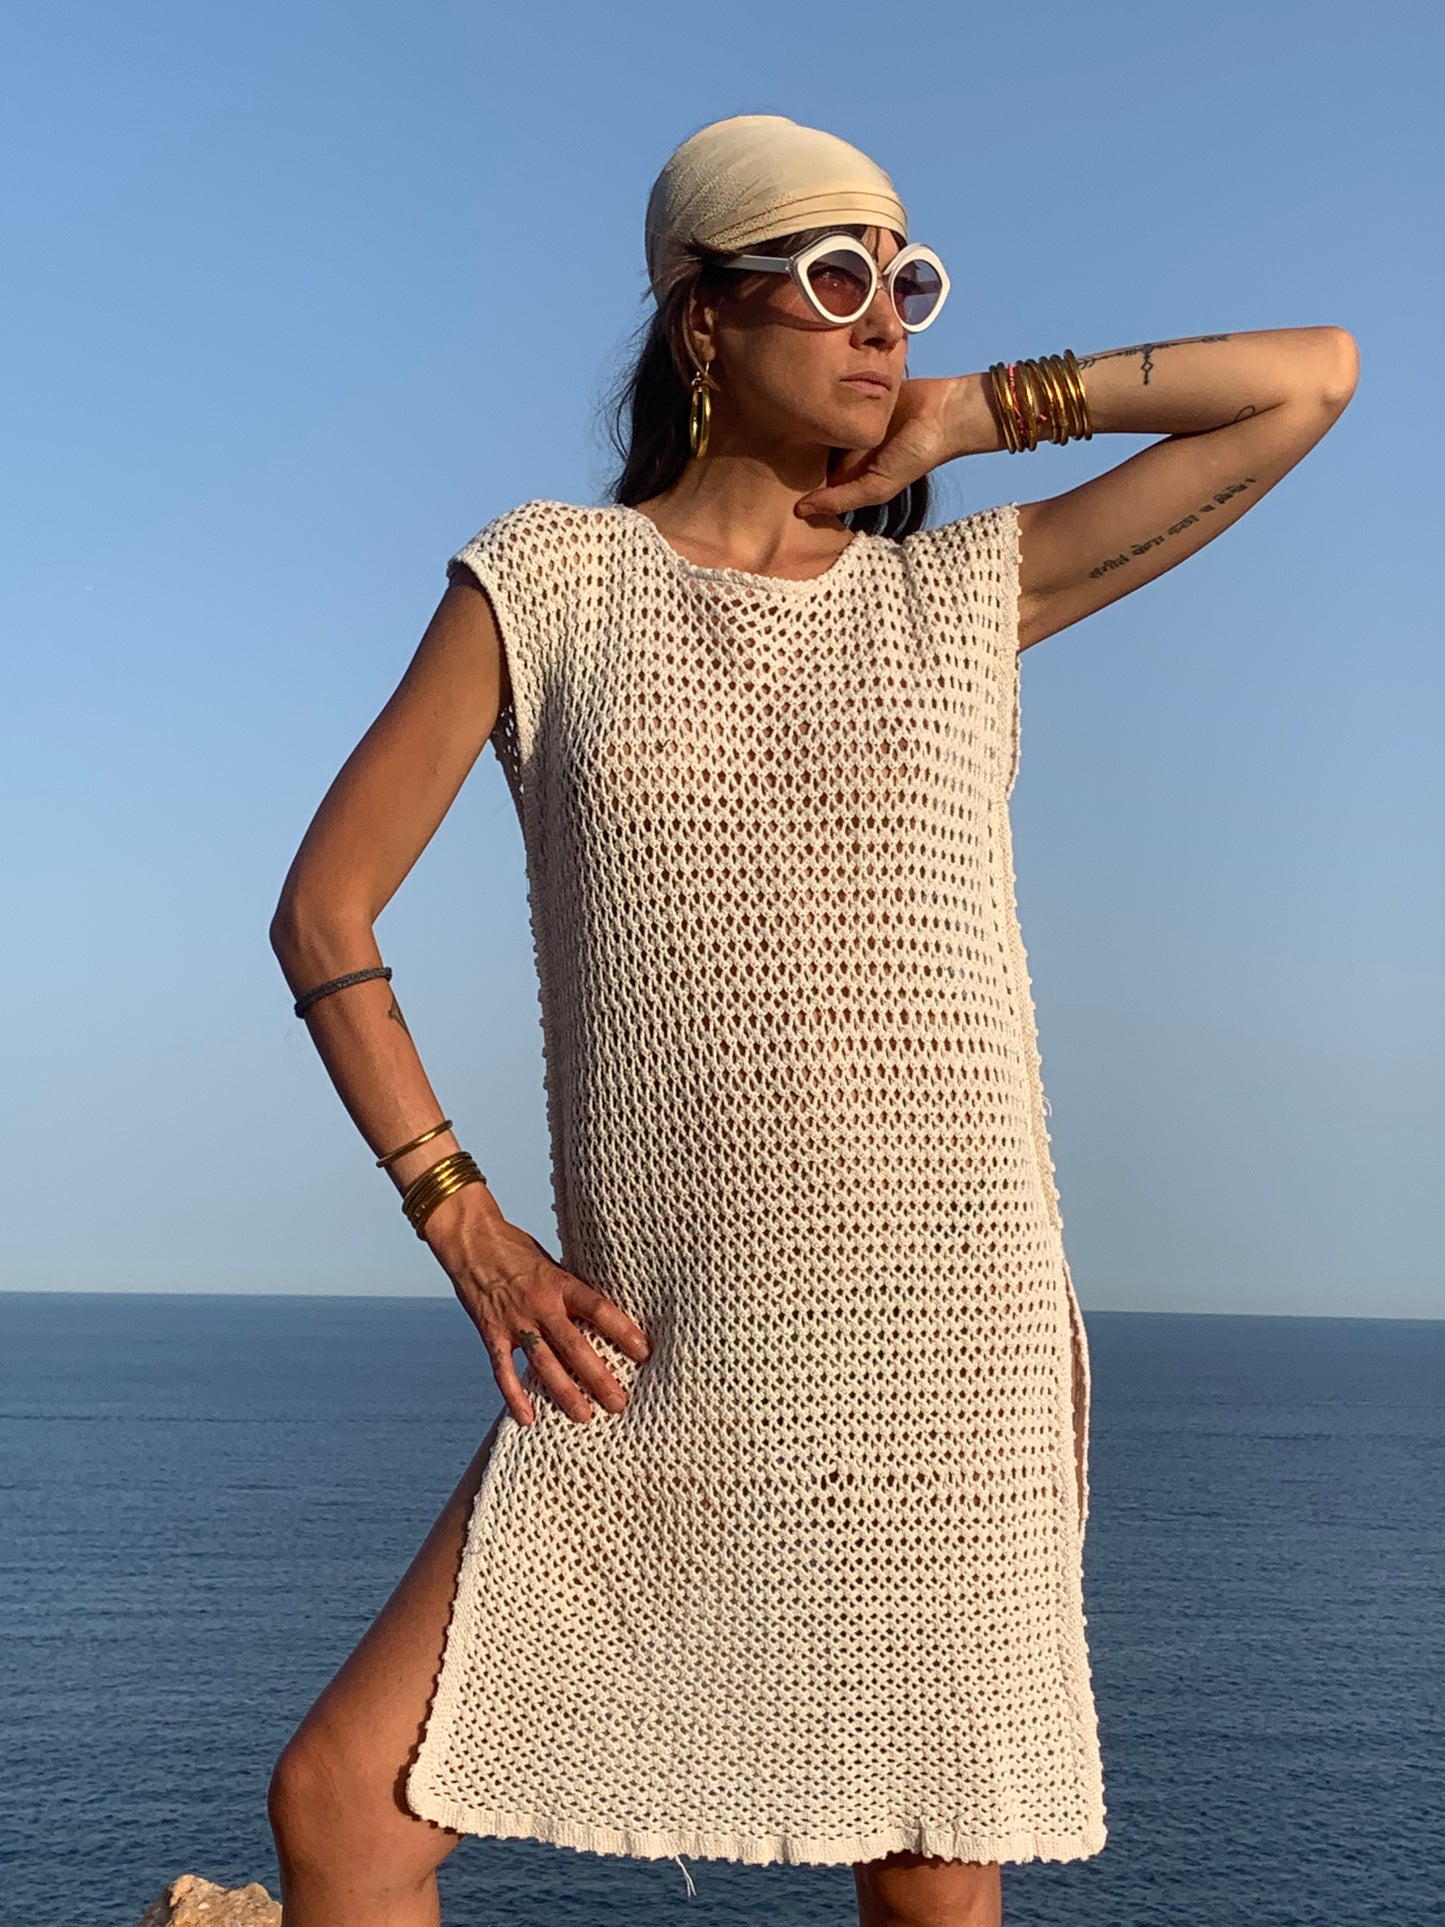 Vintage lace crochet textiles up-cycled dress by Vagabond Ibiza